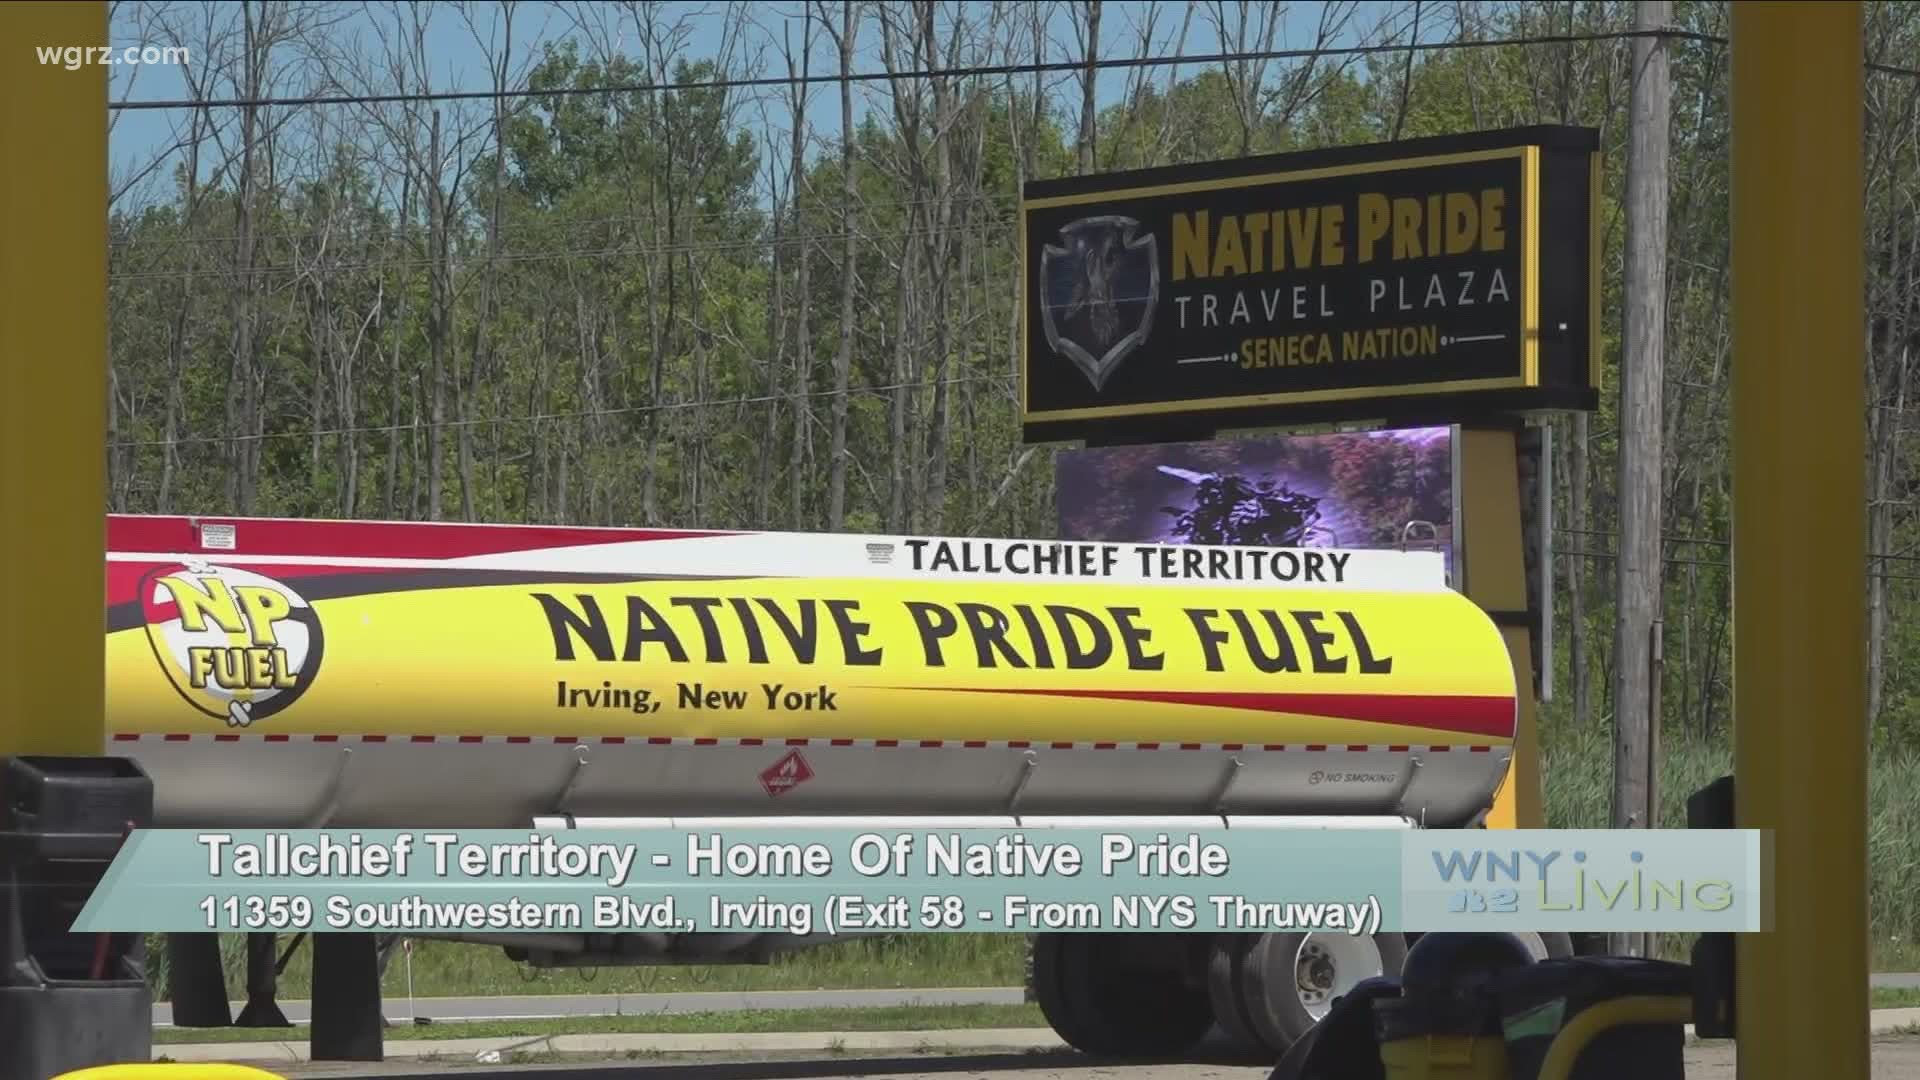 WNY Living - March 27 - Tallchief Territory - Home of Native Pride (THIS VIDEO IS SPONSORED BY TALLCHIEF TERRITORY - HOME OF NATIVE PRIDE)